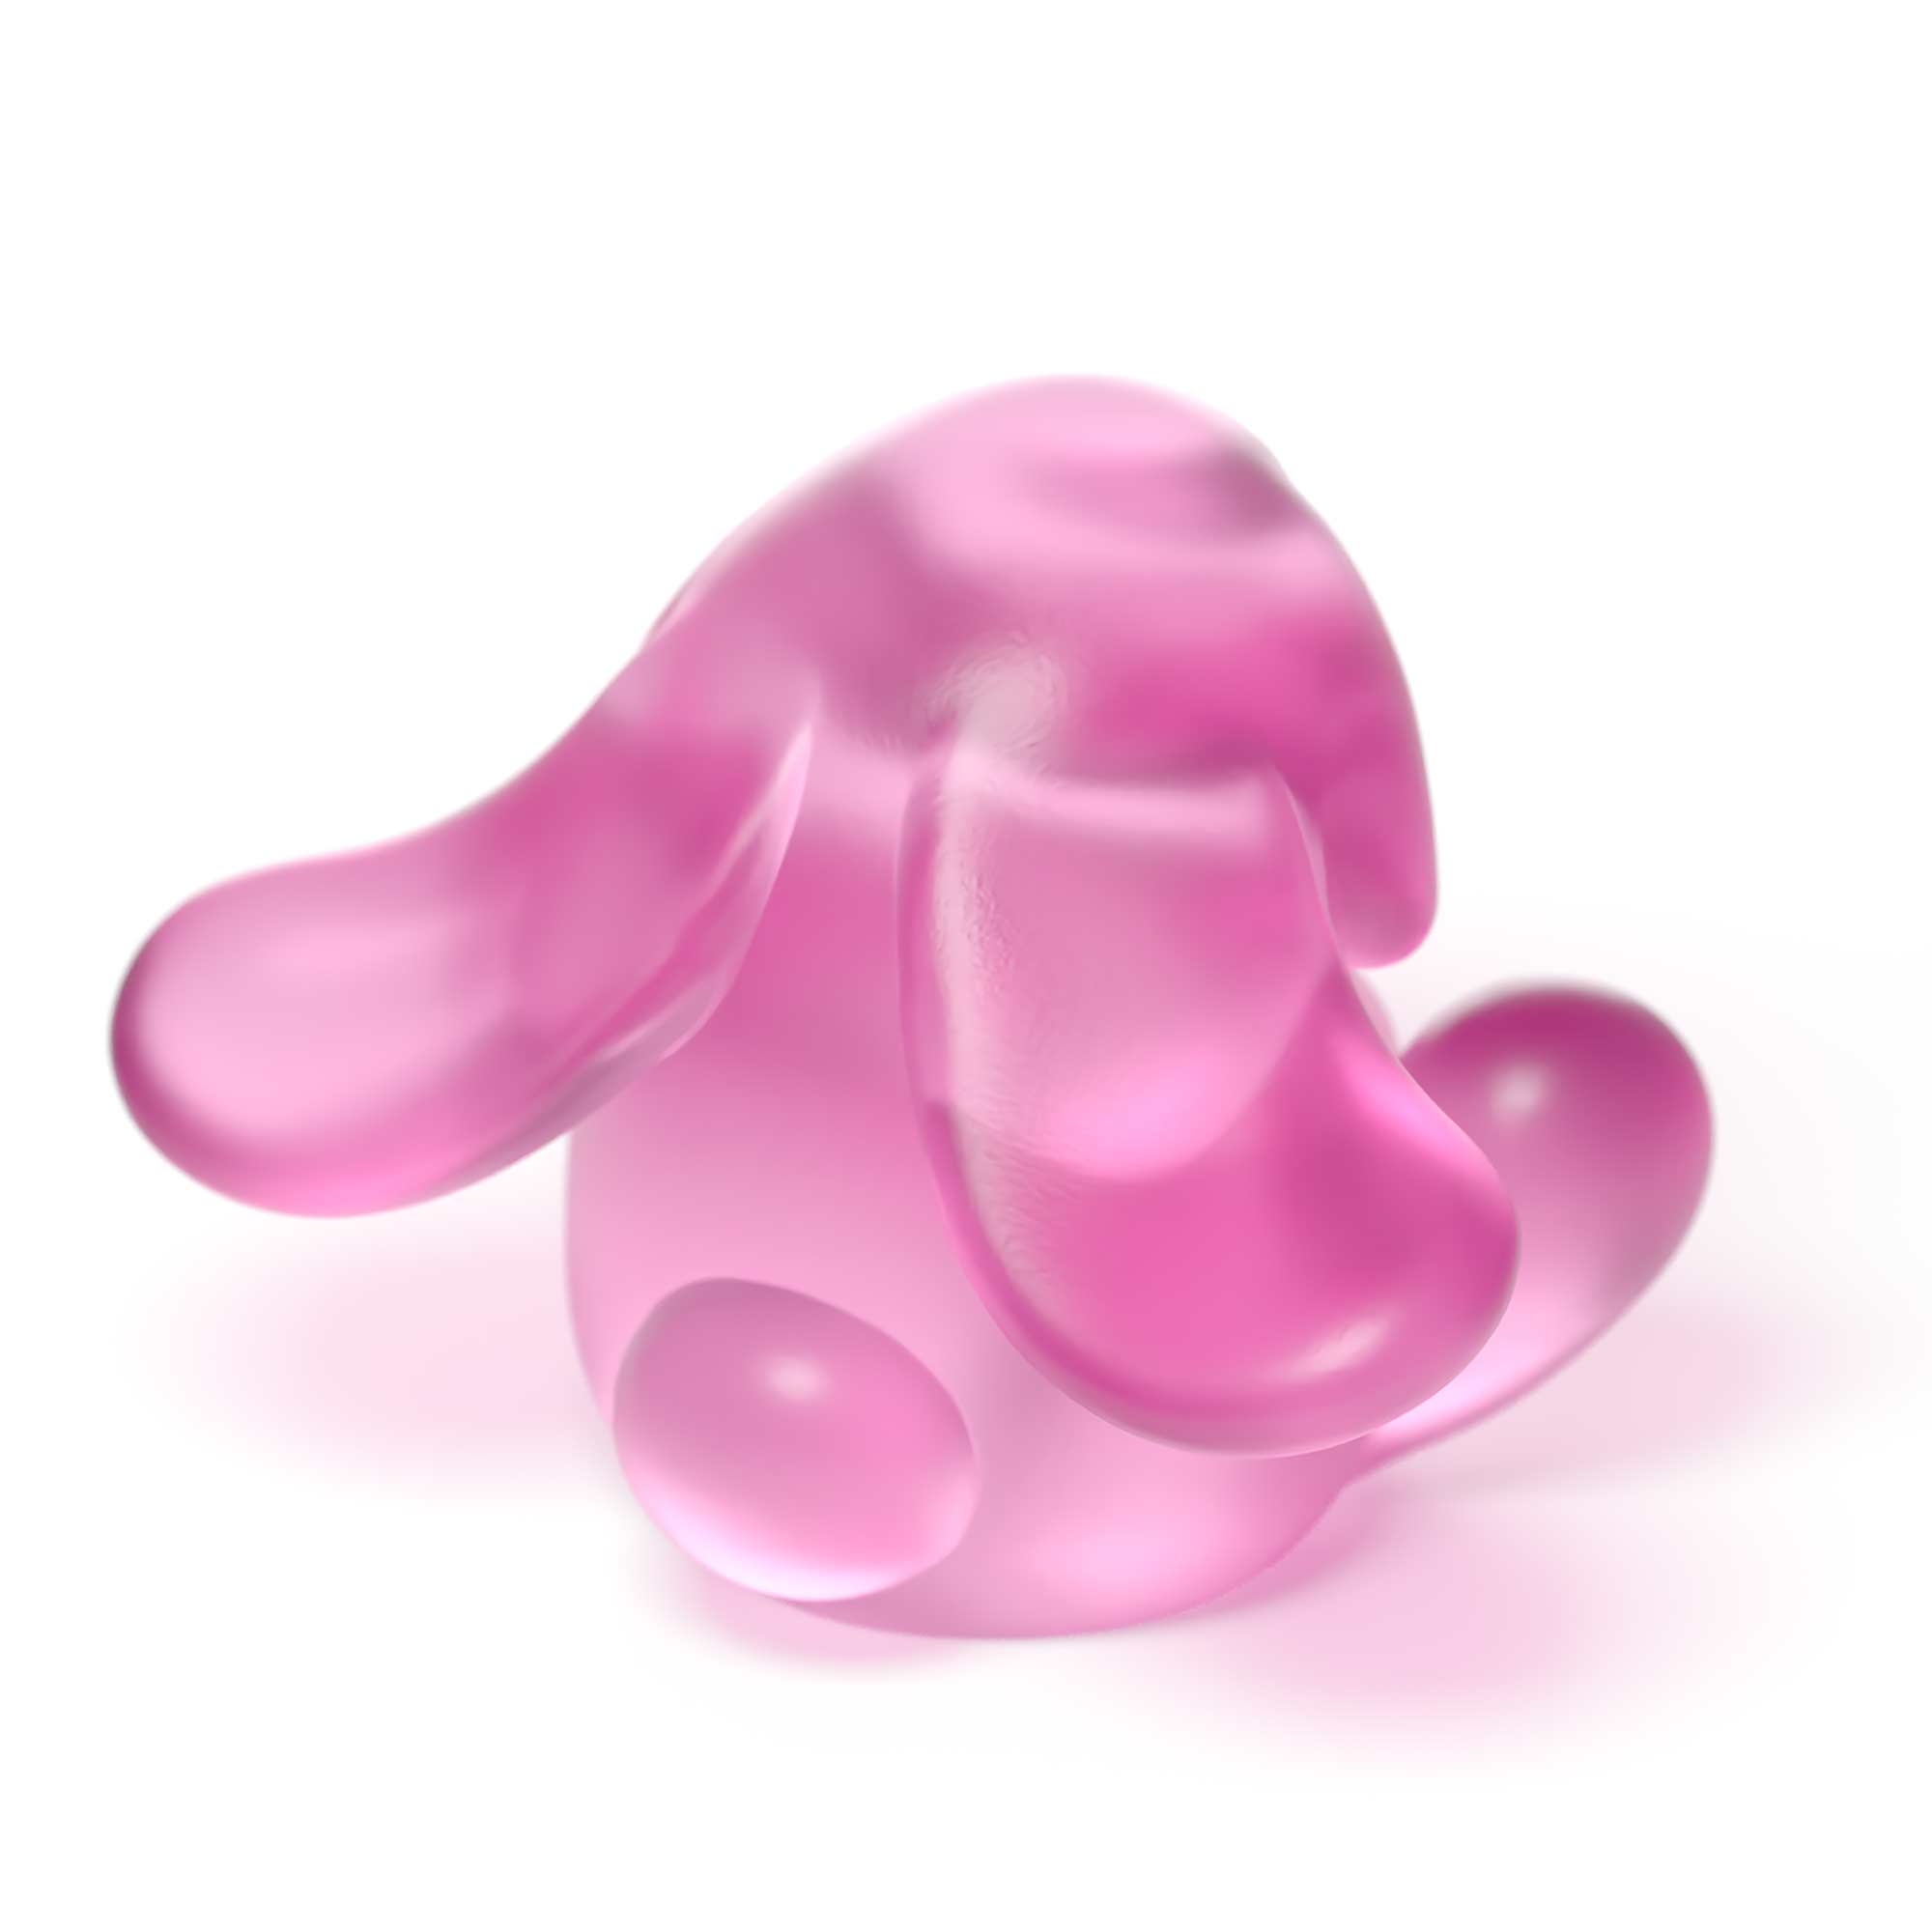 "Bunnie Roar Crystal," a sculpture, pink color, is an artistic creation by Ferdi B Dick 02 back view with tail